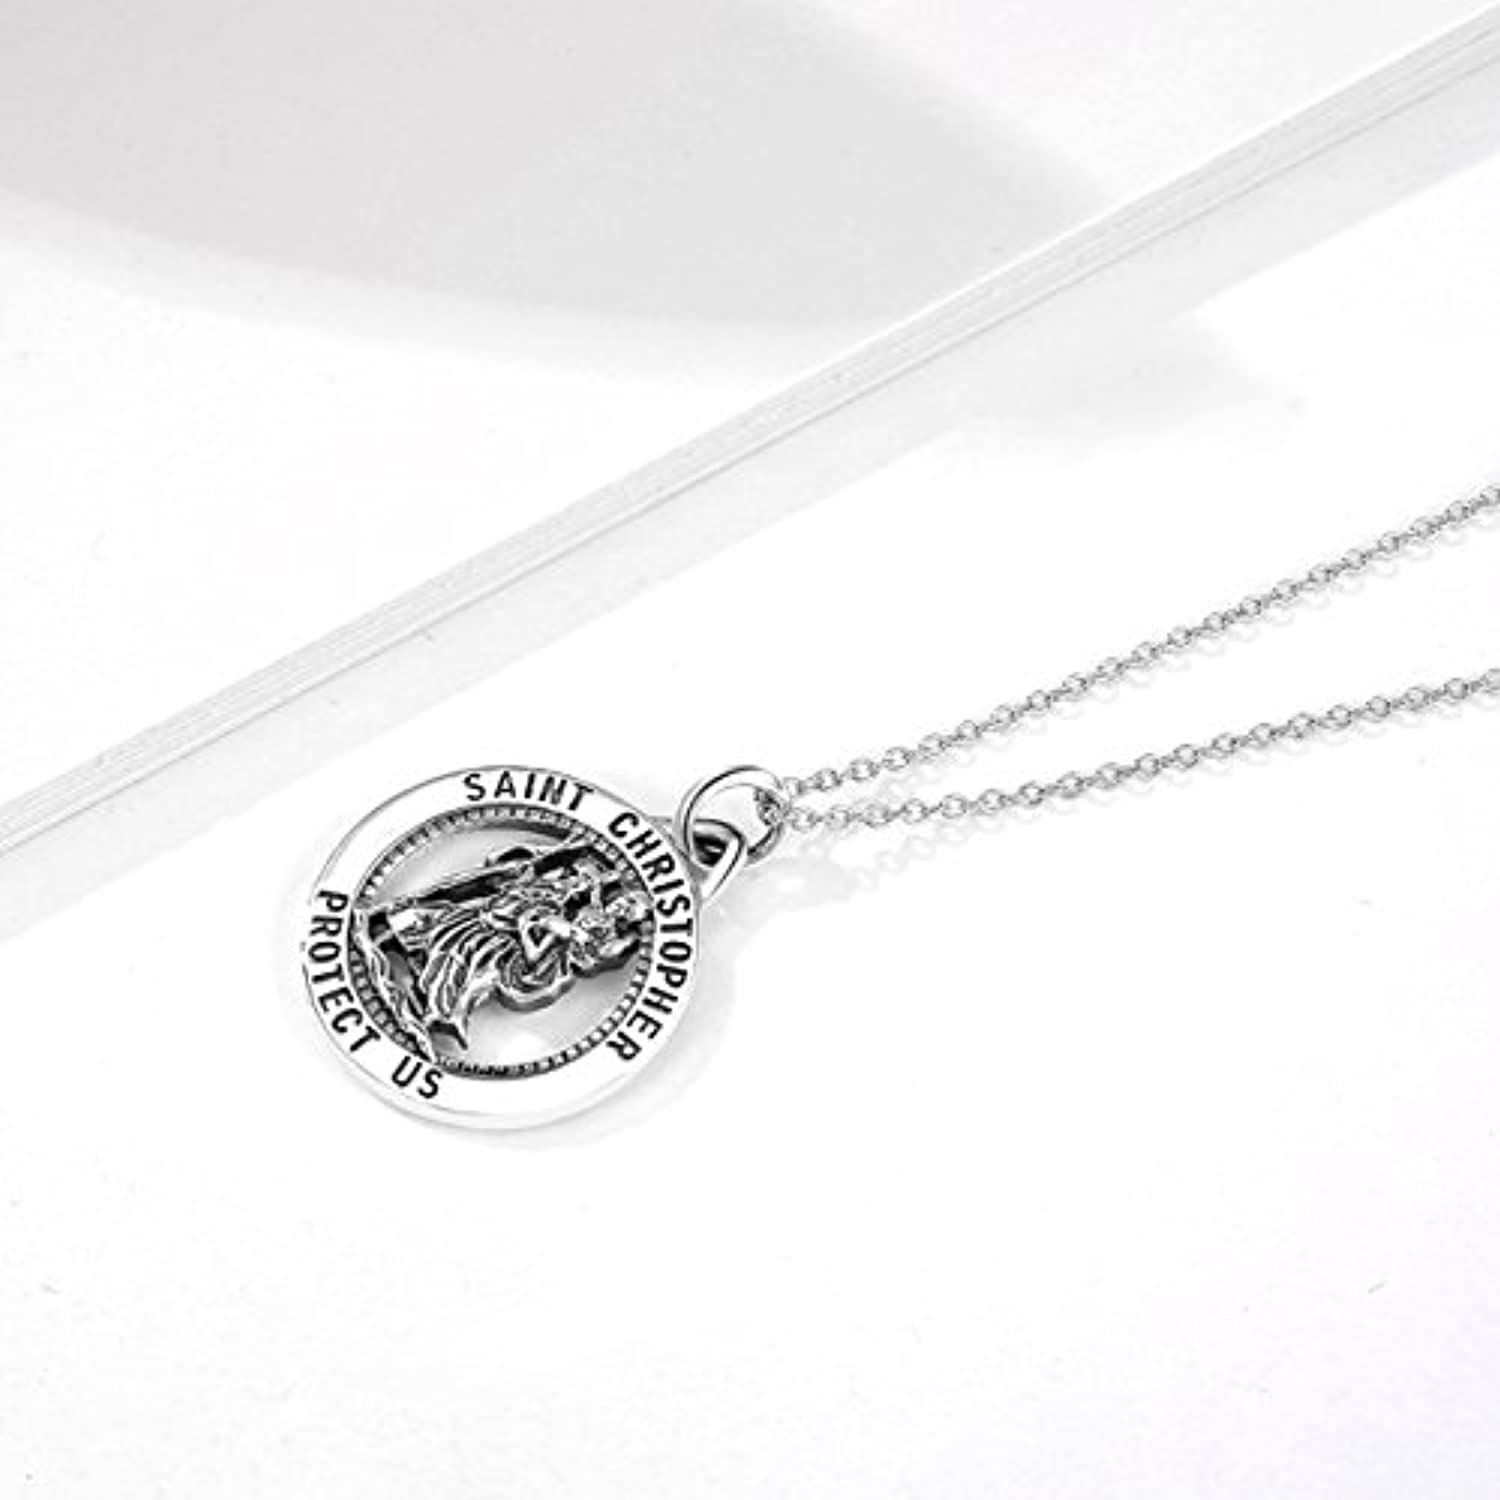 Saint Christopher Protect Us Necklace 925 Sterling Silver Religious Engraved Medallion Pendant Necklace Jewelry